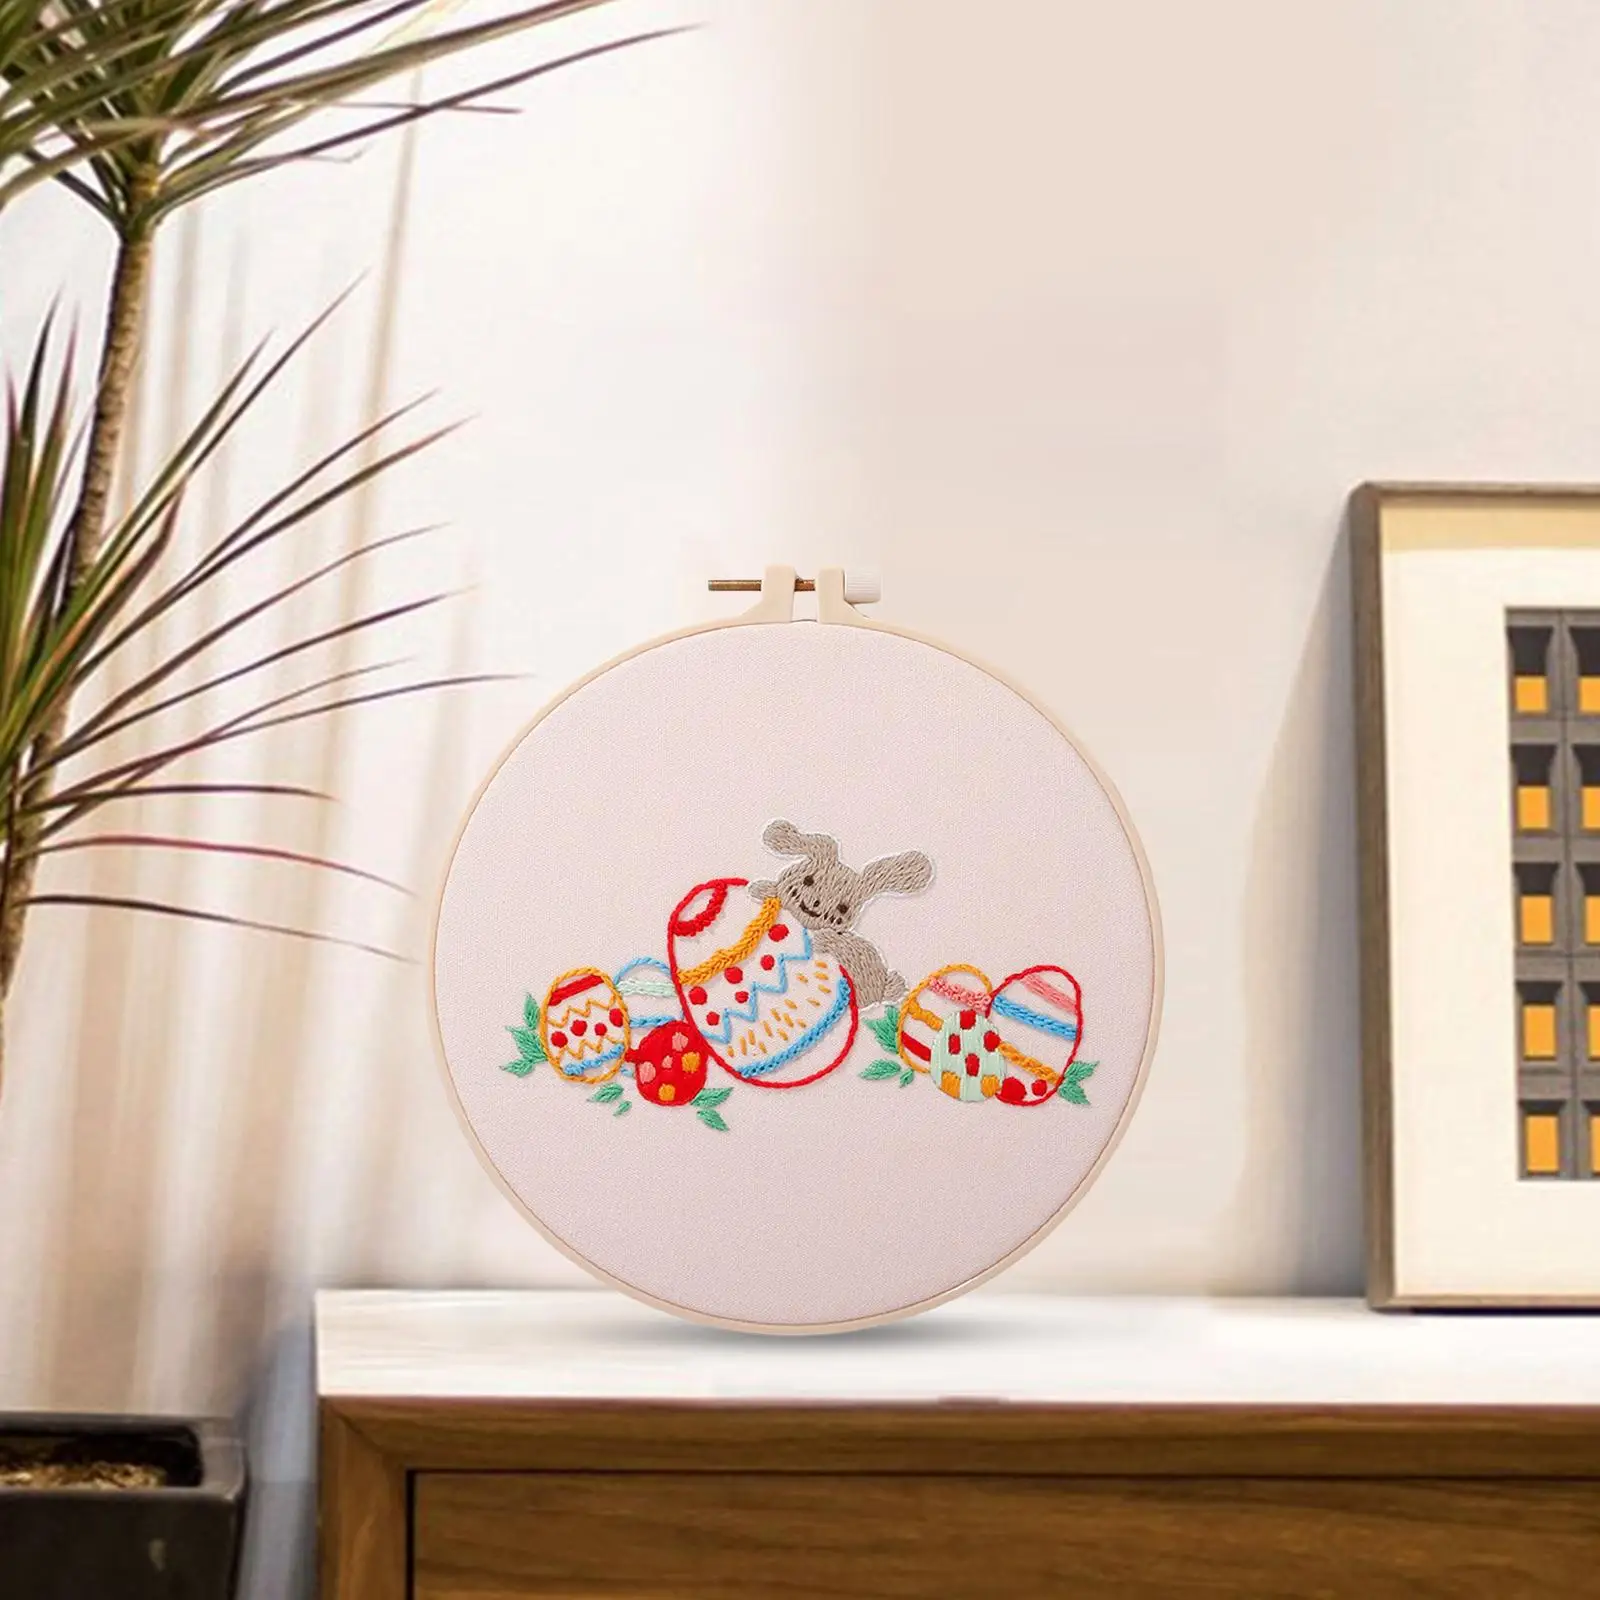 Rabbit Pattern Embroidery Starter Kit Embroidery Hoop Handmade for Beginners DIY Cross Stitch Home Decoration Supplies Gift